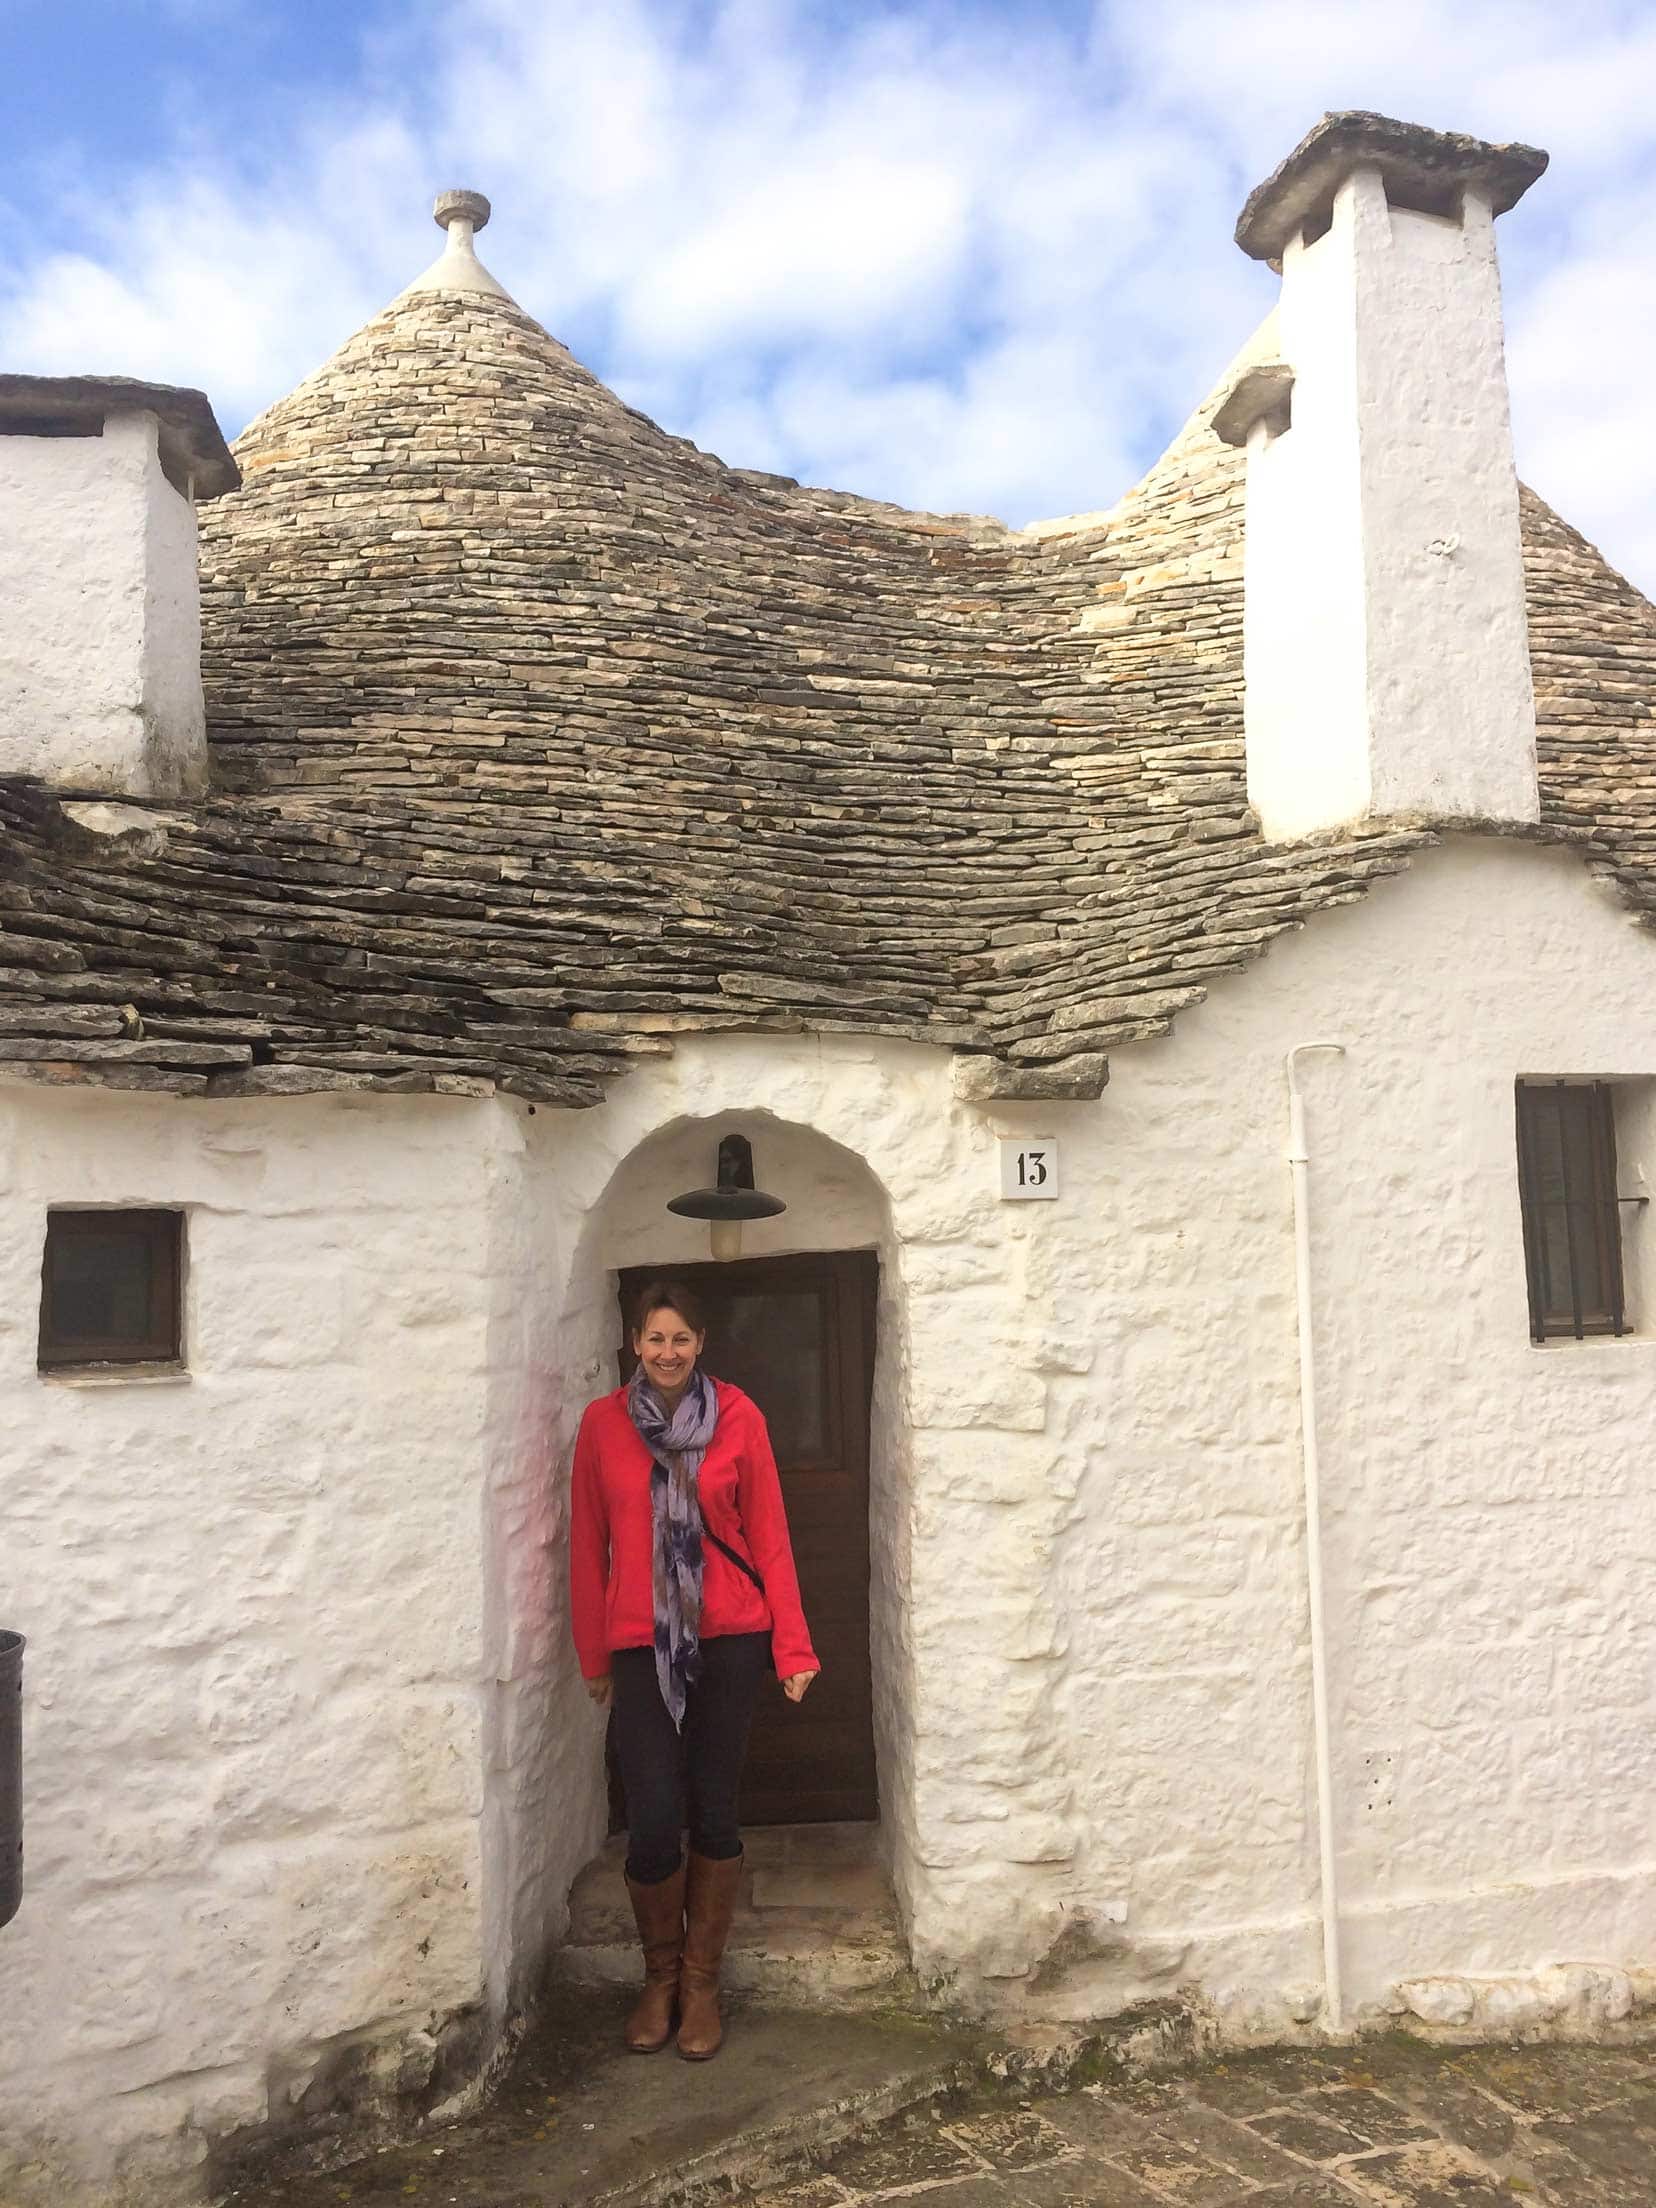 Shelley stood in doorway of a trulli